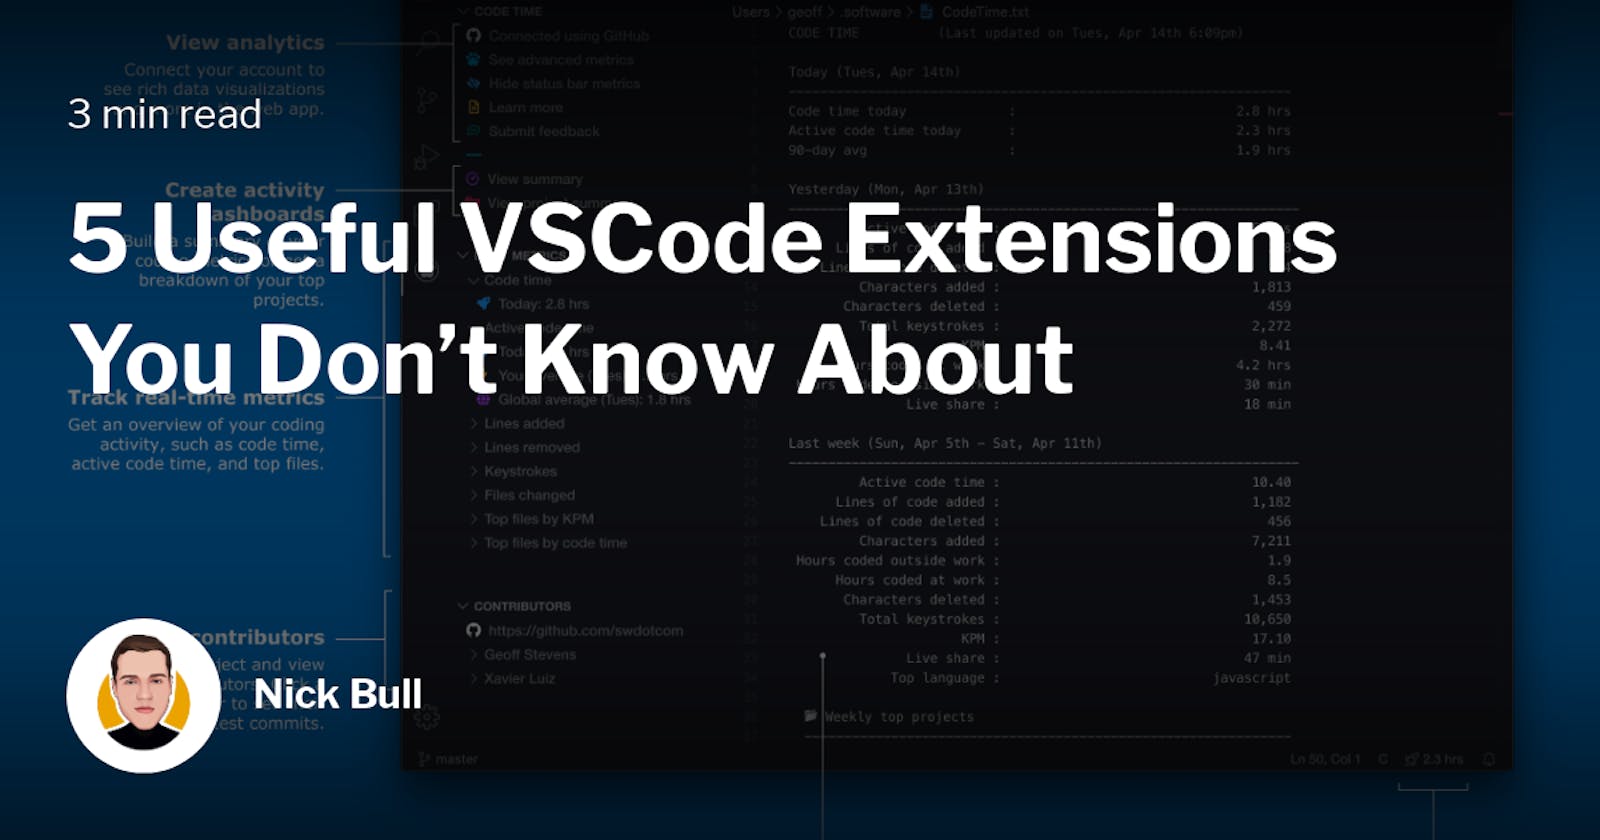 5 Useful VSCode Extensions You Don’t Know About